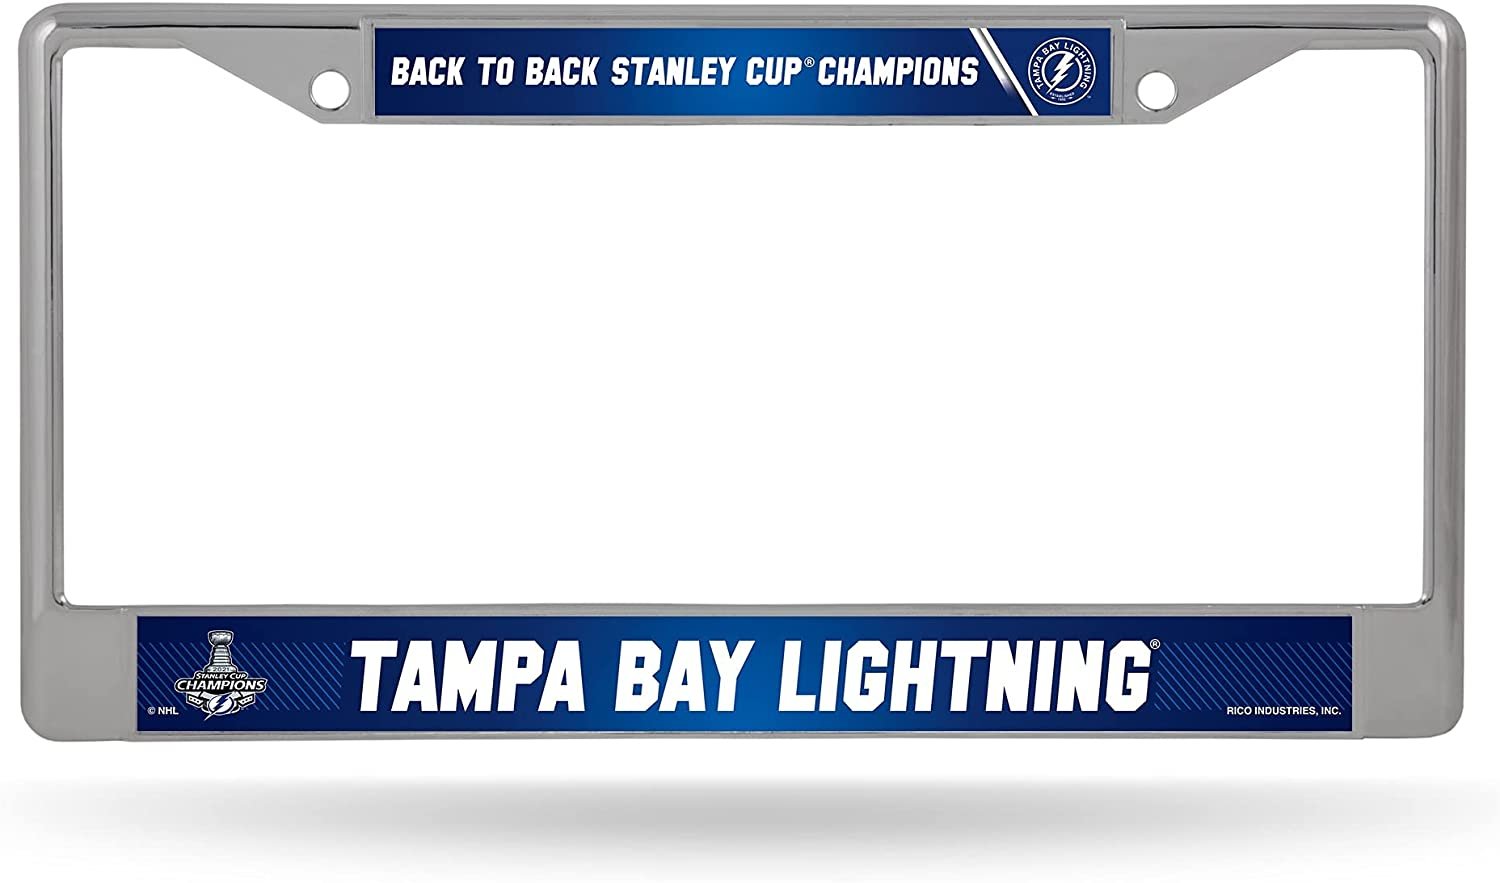 Tampa Bay Lightning 2021 Stanley Cup Champions Metal License Plate Frame Chrome Tag Cover, 12x6 Inch